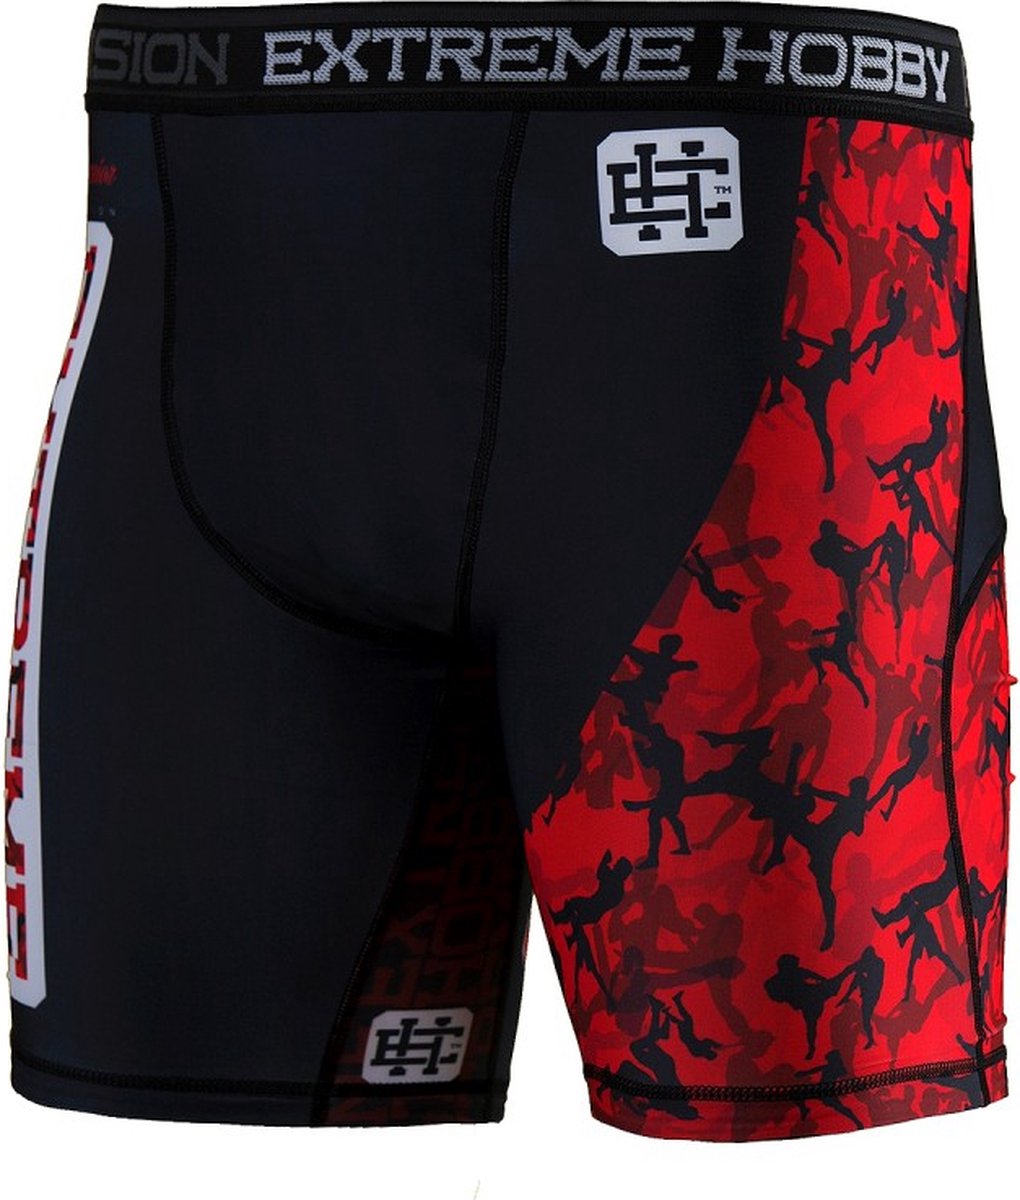 Extreme Hobby - Red Warrior - Vale Tudo Shorts - Compression shorts - Rood, Zwaart - Maat XXL